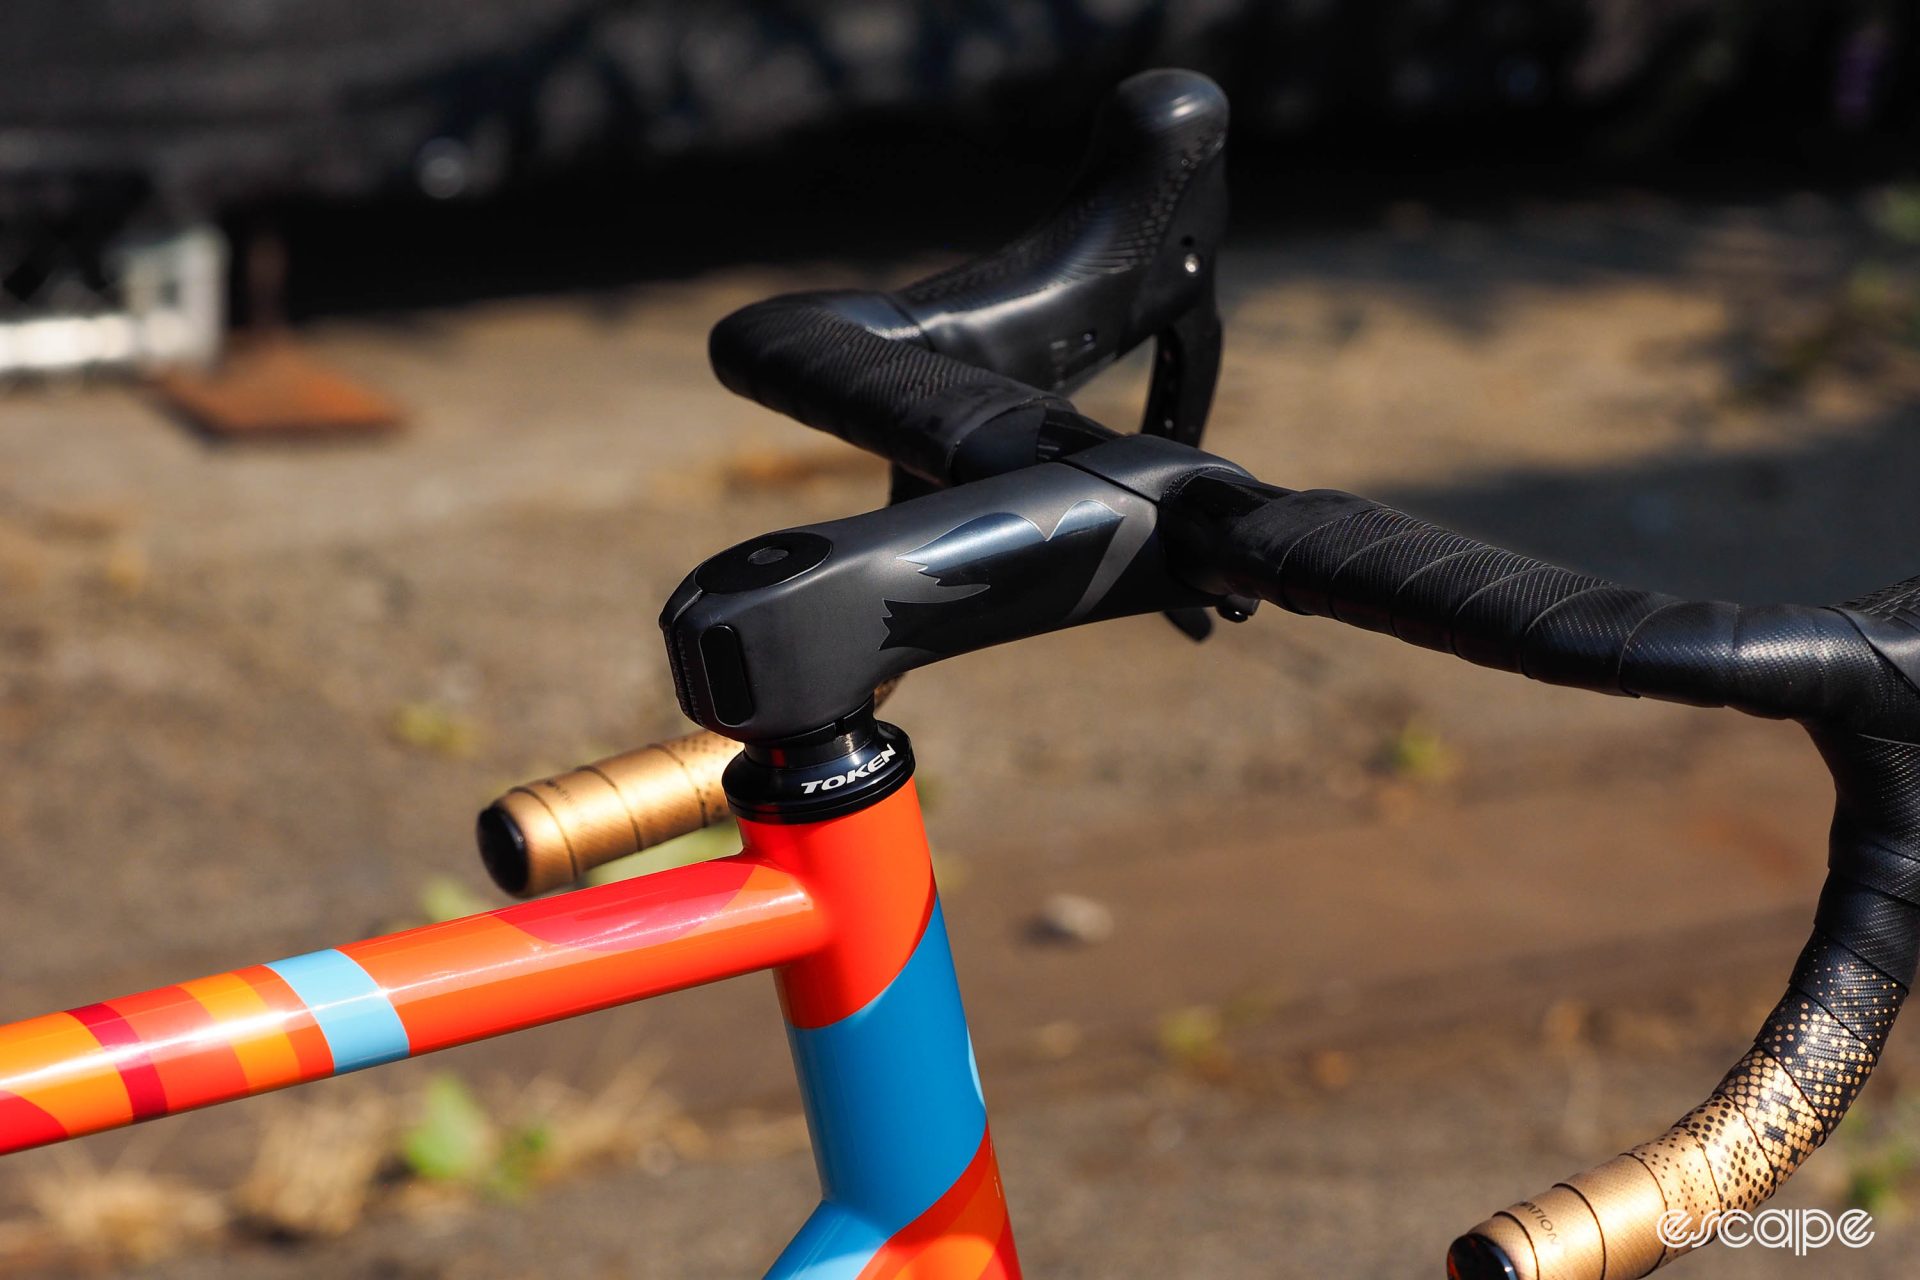 Detail shot of integrated stem routing, with cables fully concealed.